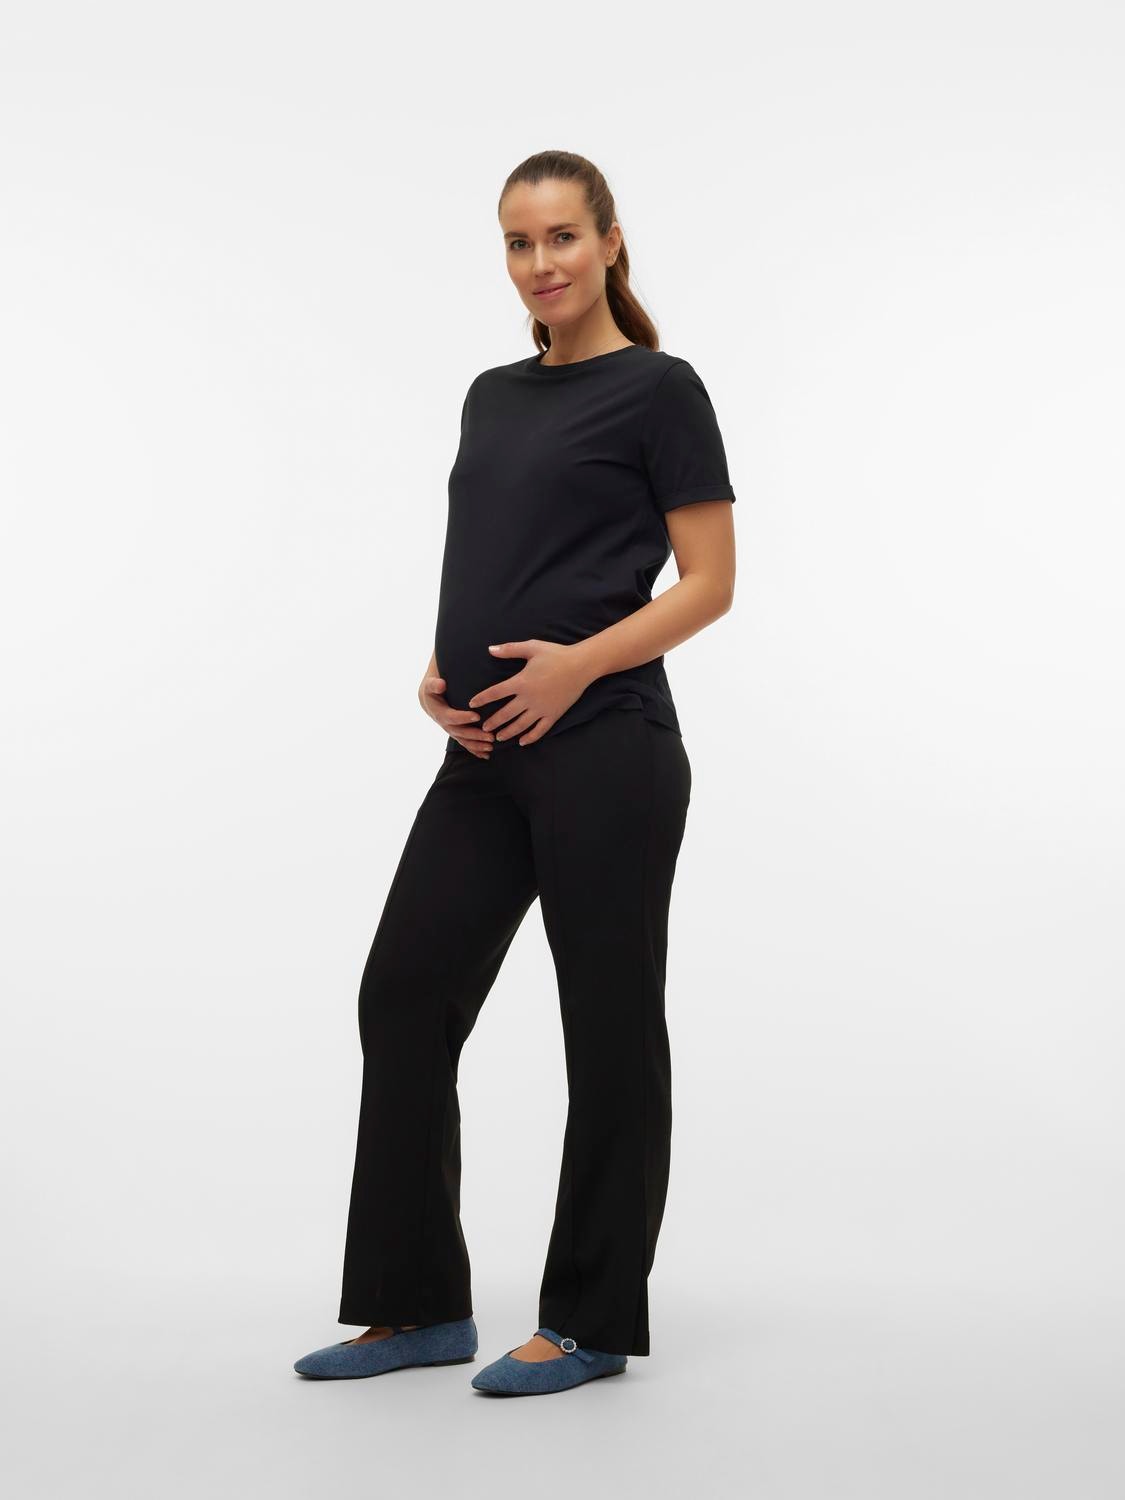 MAMA.LICIOUS Regular Fit Side slits Trousers -Black - 20019366